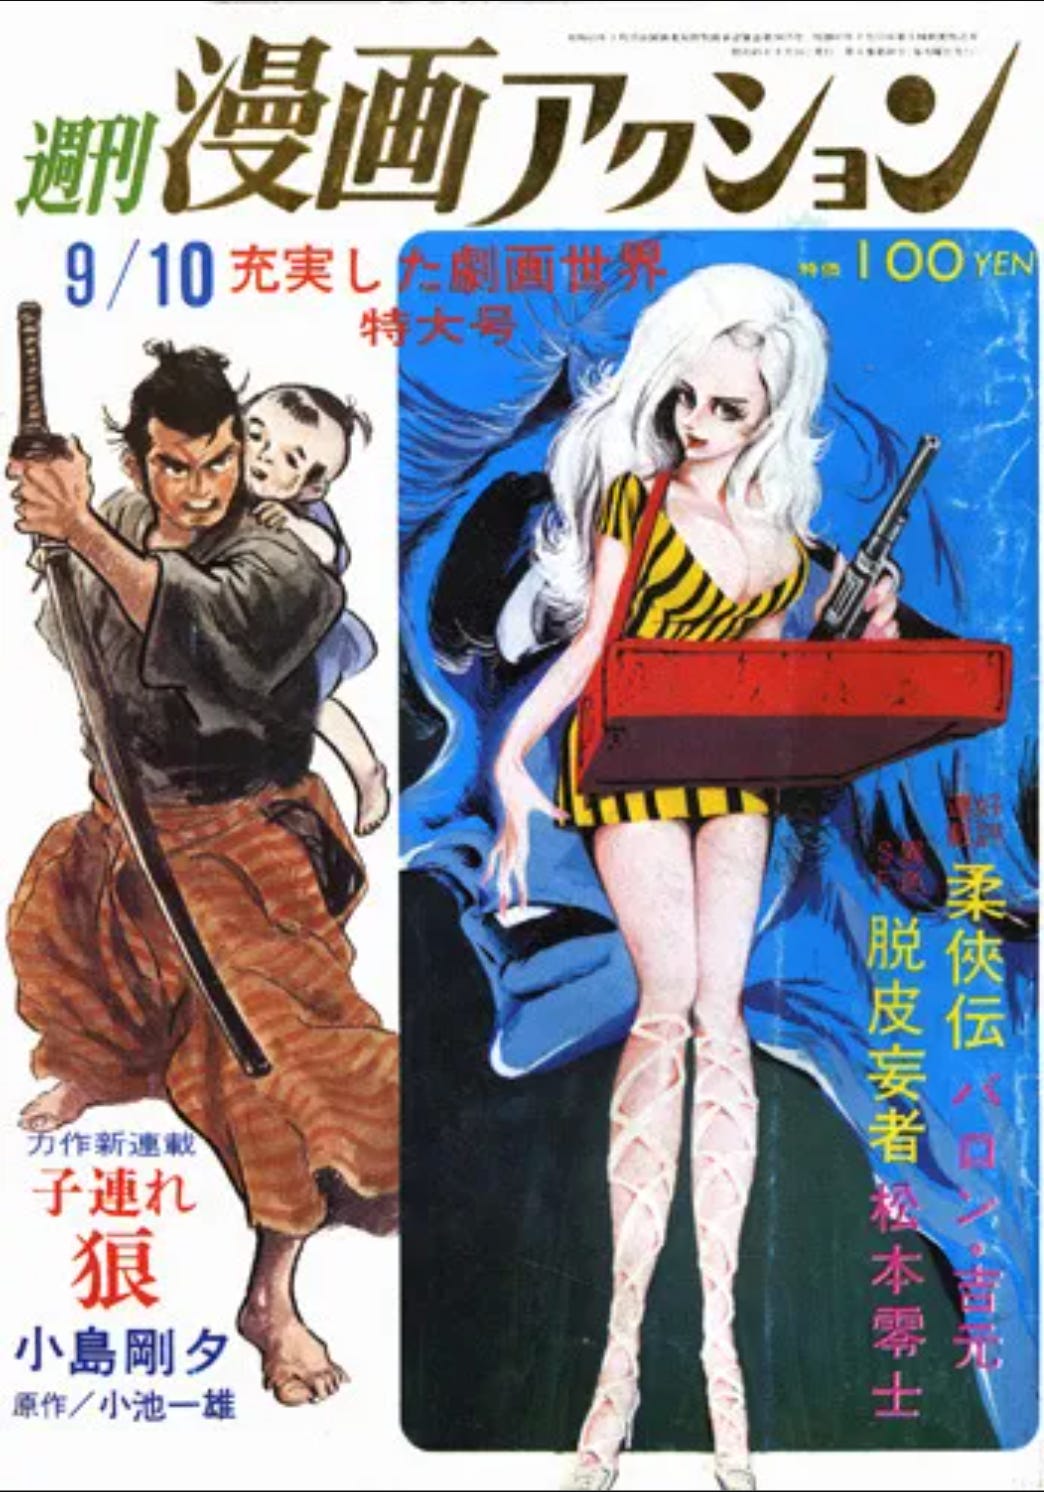 Weekly Action Magazine with Lone Wolf and Cub